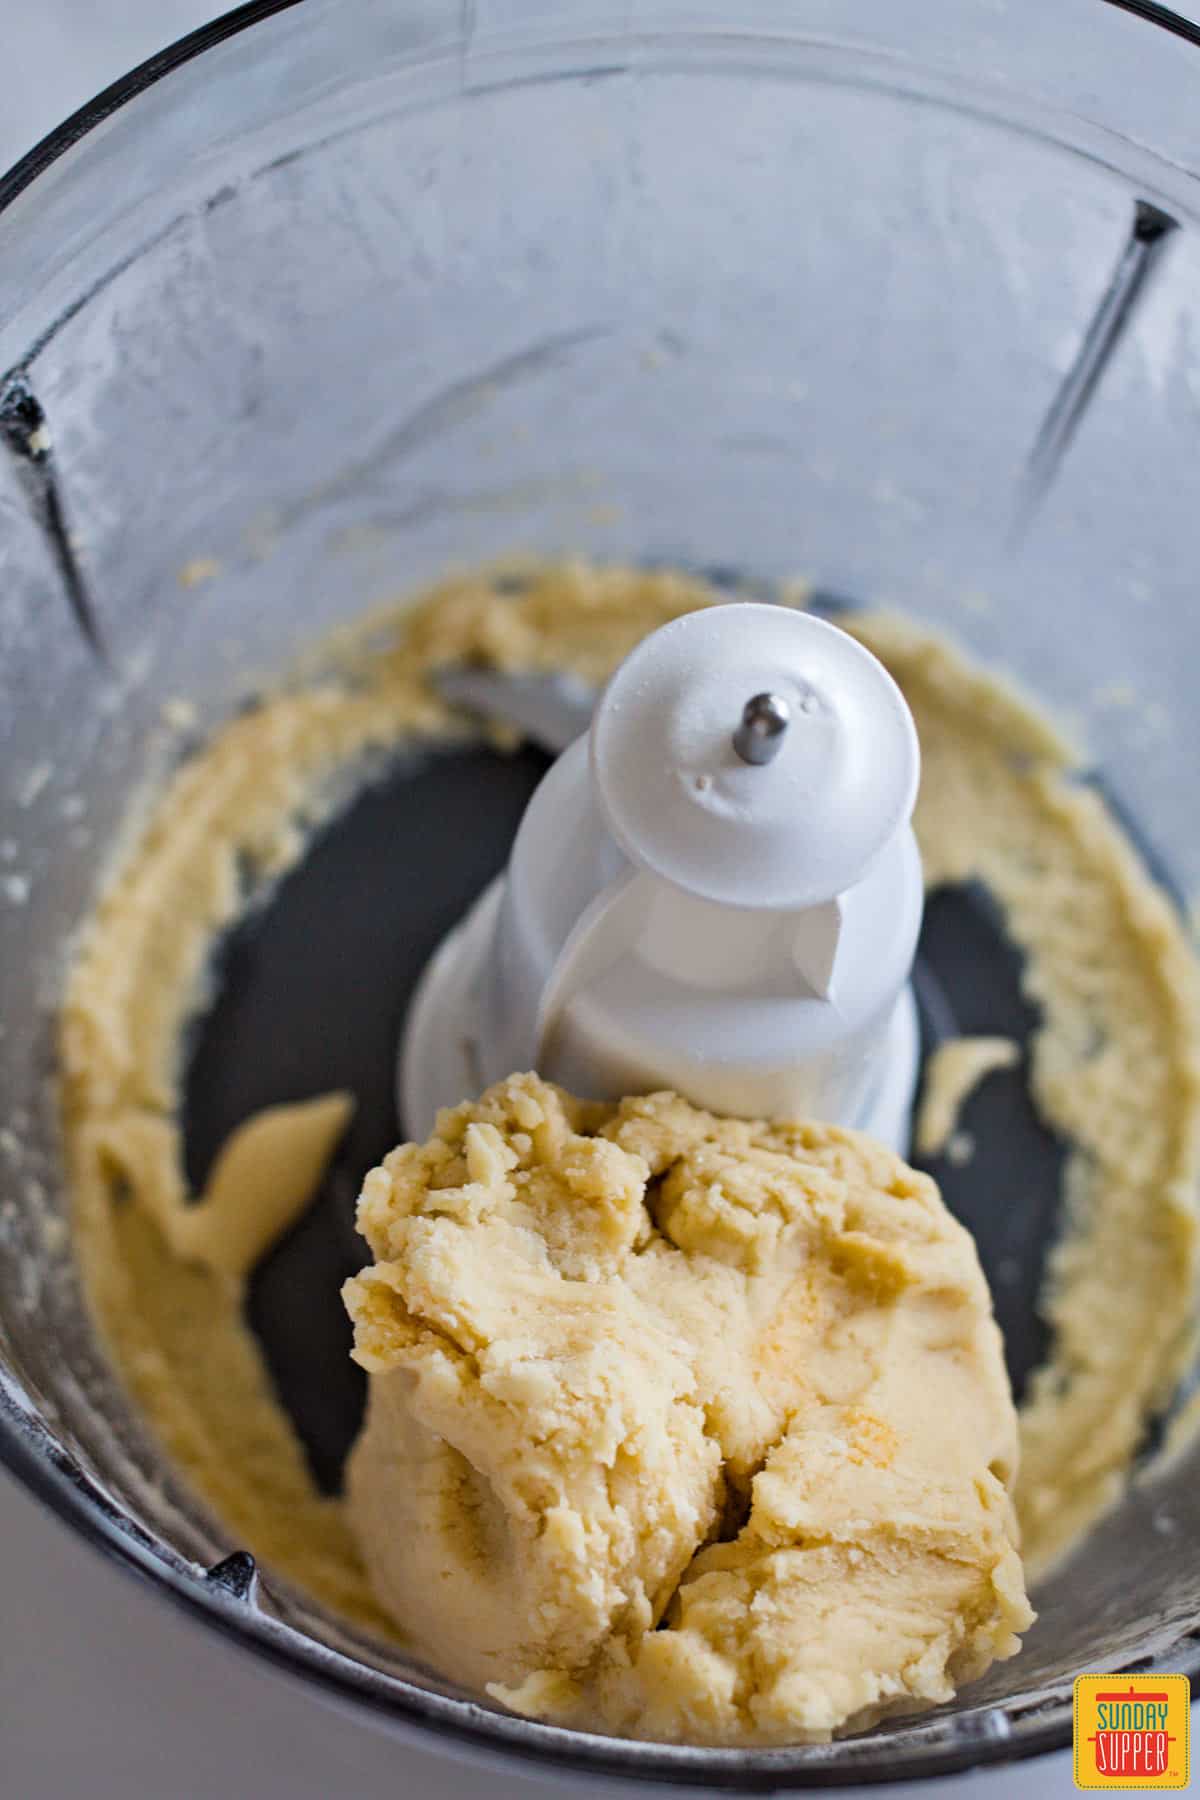 Empanada dough in the food processor after mixing